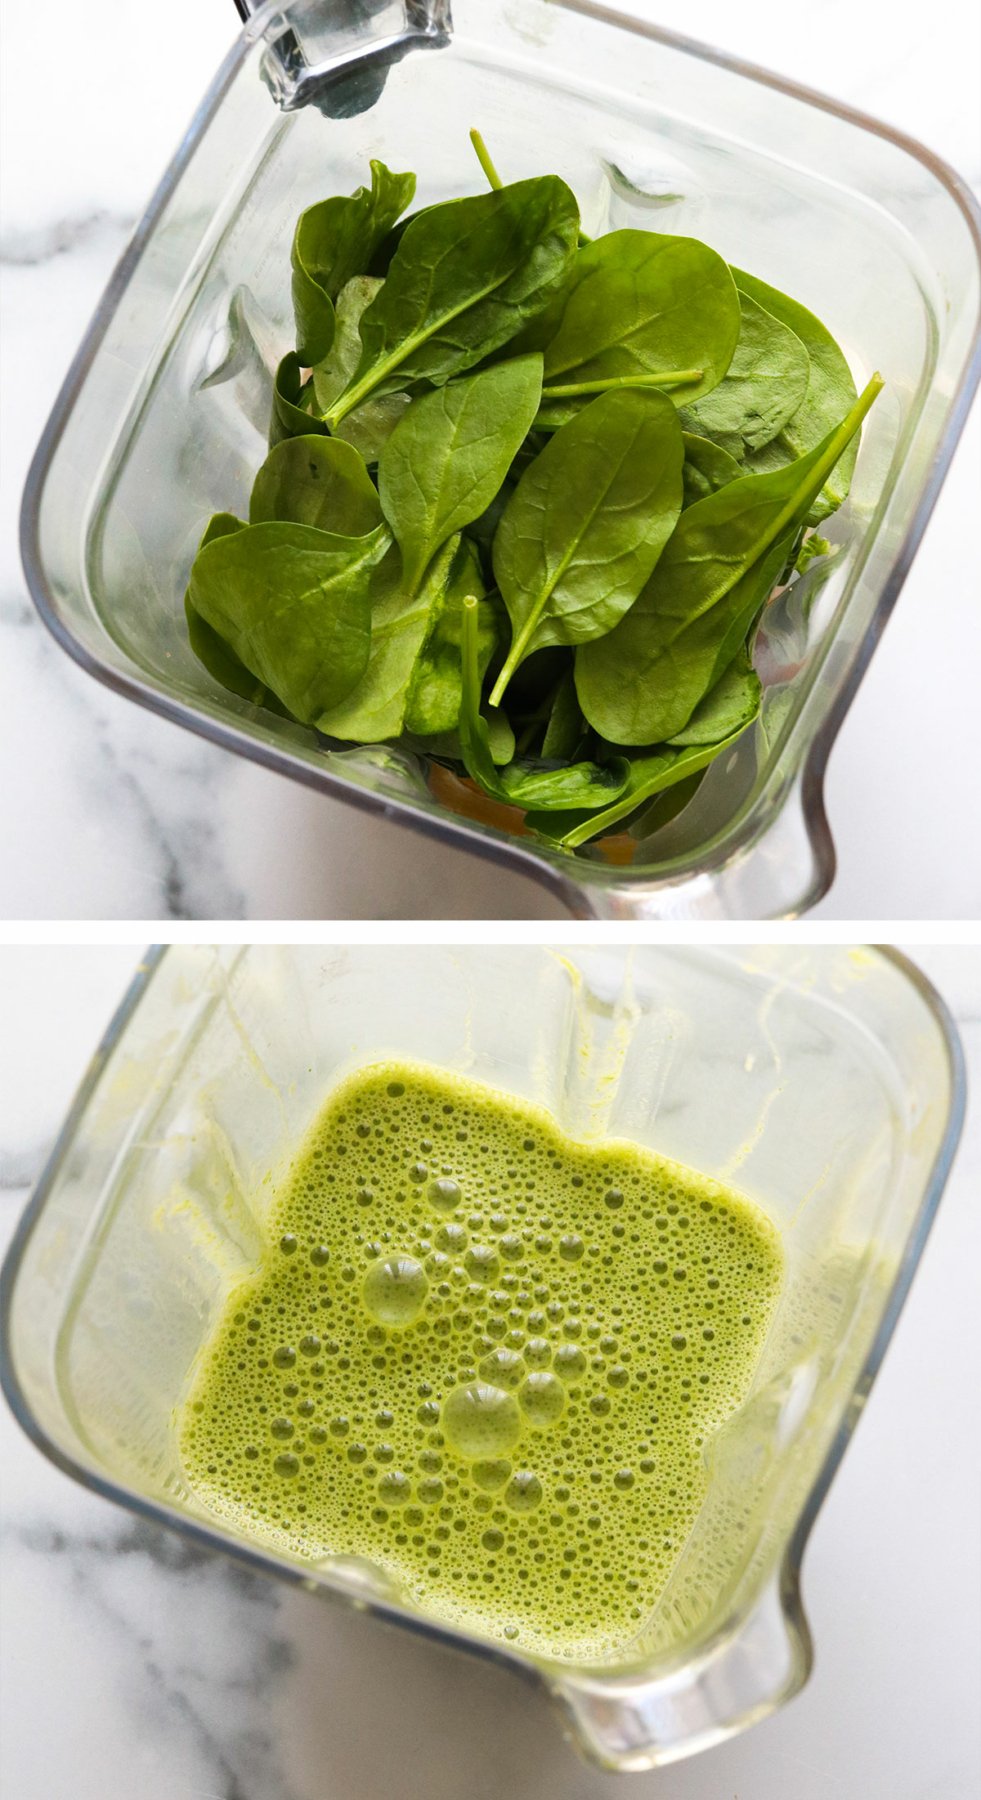 spinach blended with liquid ingredients in a blender pitcher.